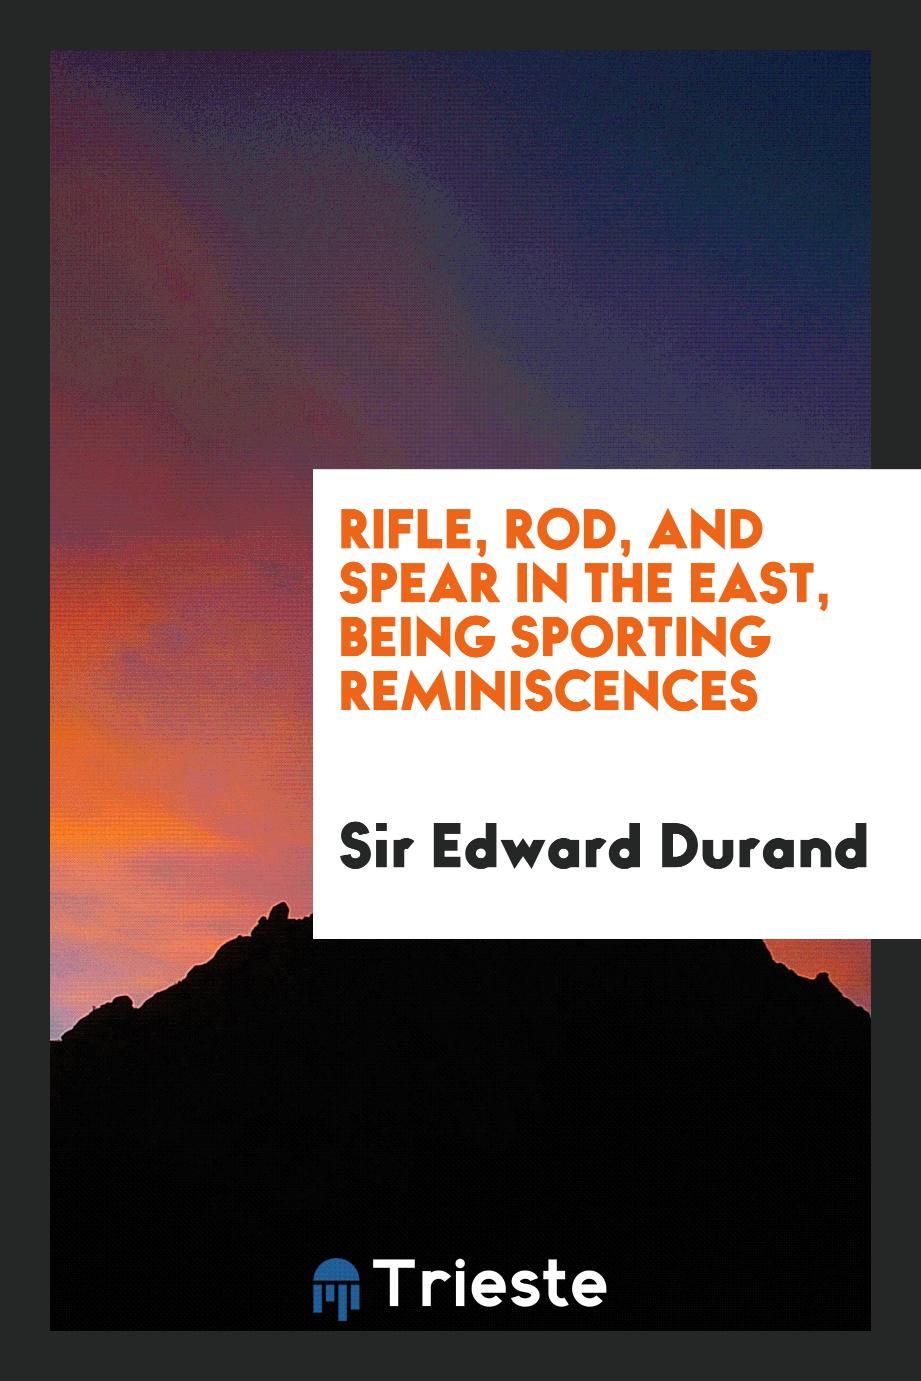 Rifle, rod, and spear in the East, being sporting reminiscences